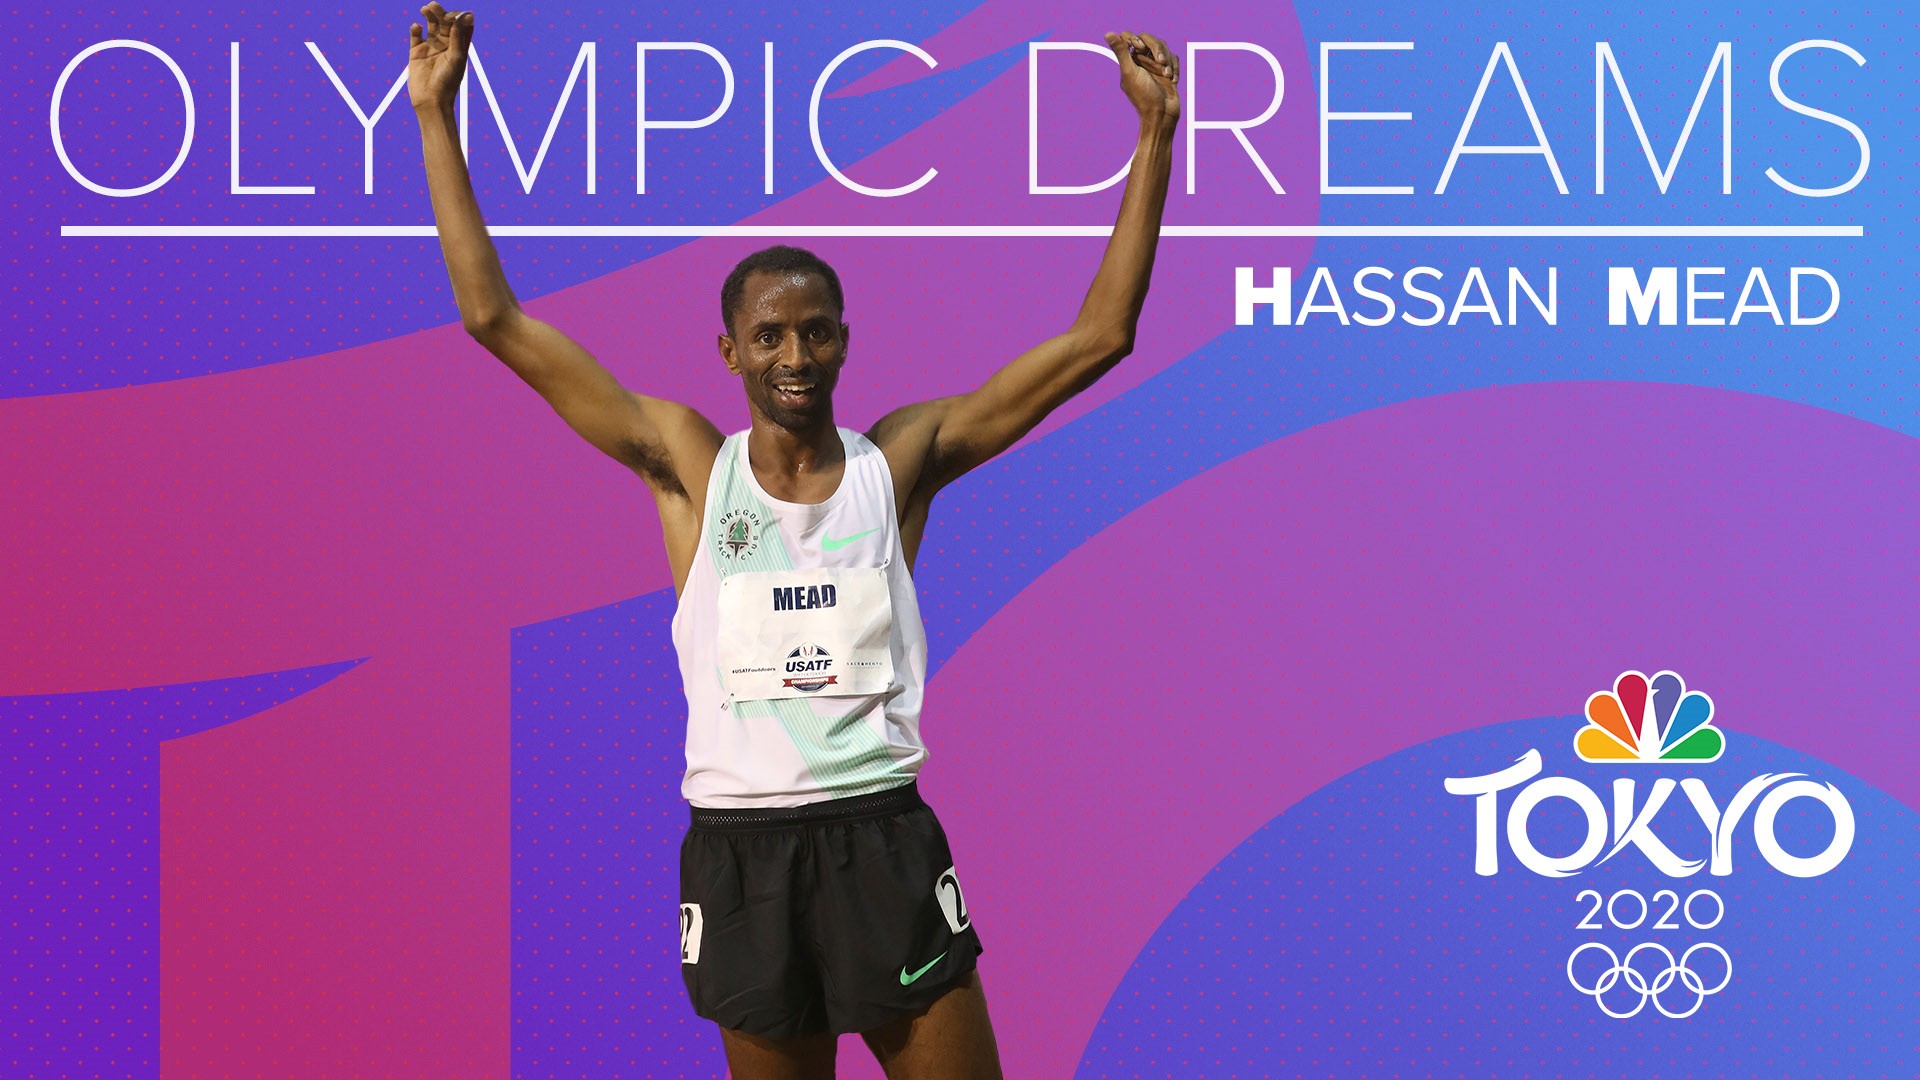 Hassan Mead, who grew up in Puyallup, is one of the best long-distance runners in the U.S. He's eyeing his second Olympic run in Tokyo in 2020.